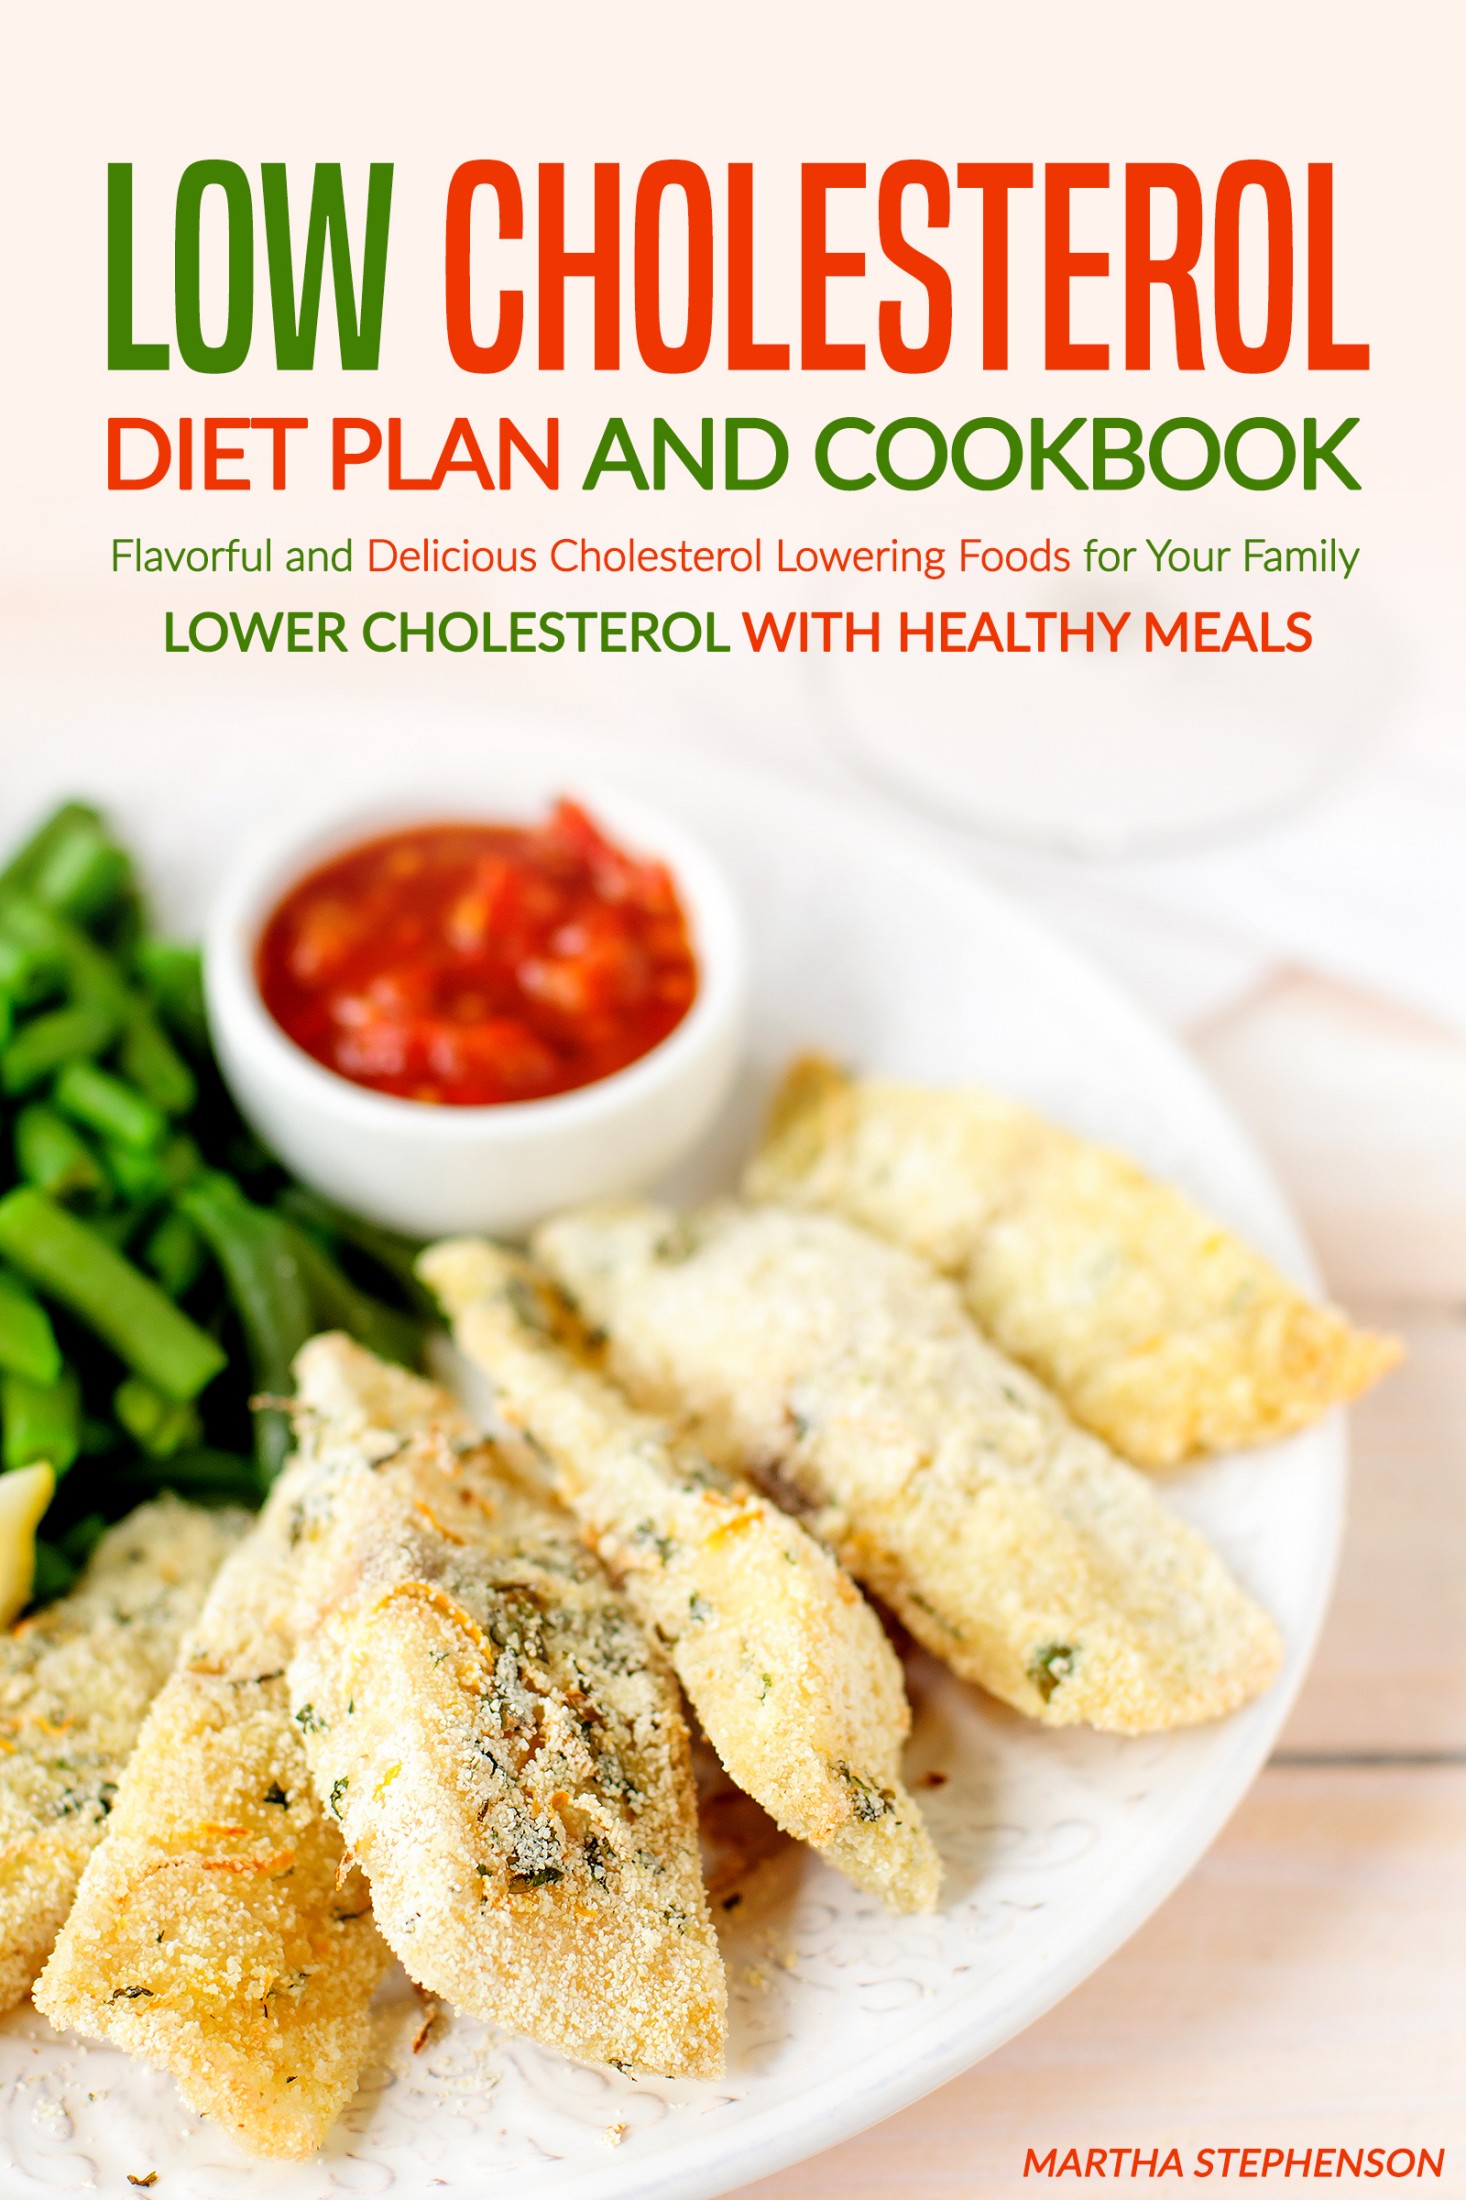 Smashwords Low Cholesterol Diet Plan And Cookbook Flavorful And Delicious Cholesterol Lowering Foods For Your Family Lower Cholesterol With Healthy Meals A Book By Martha Stephenson